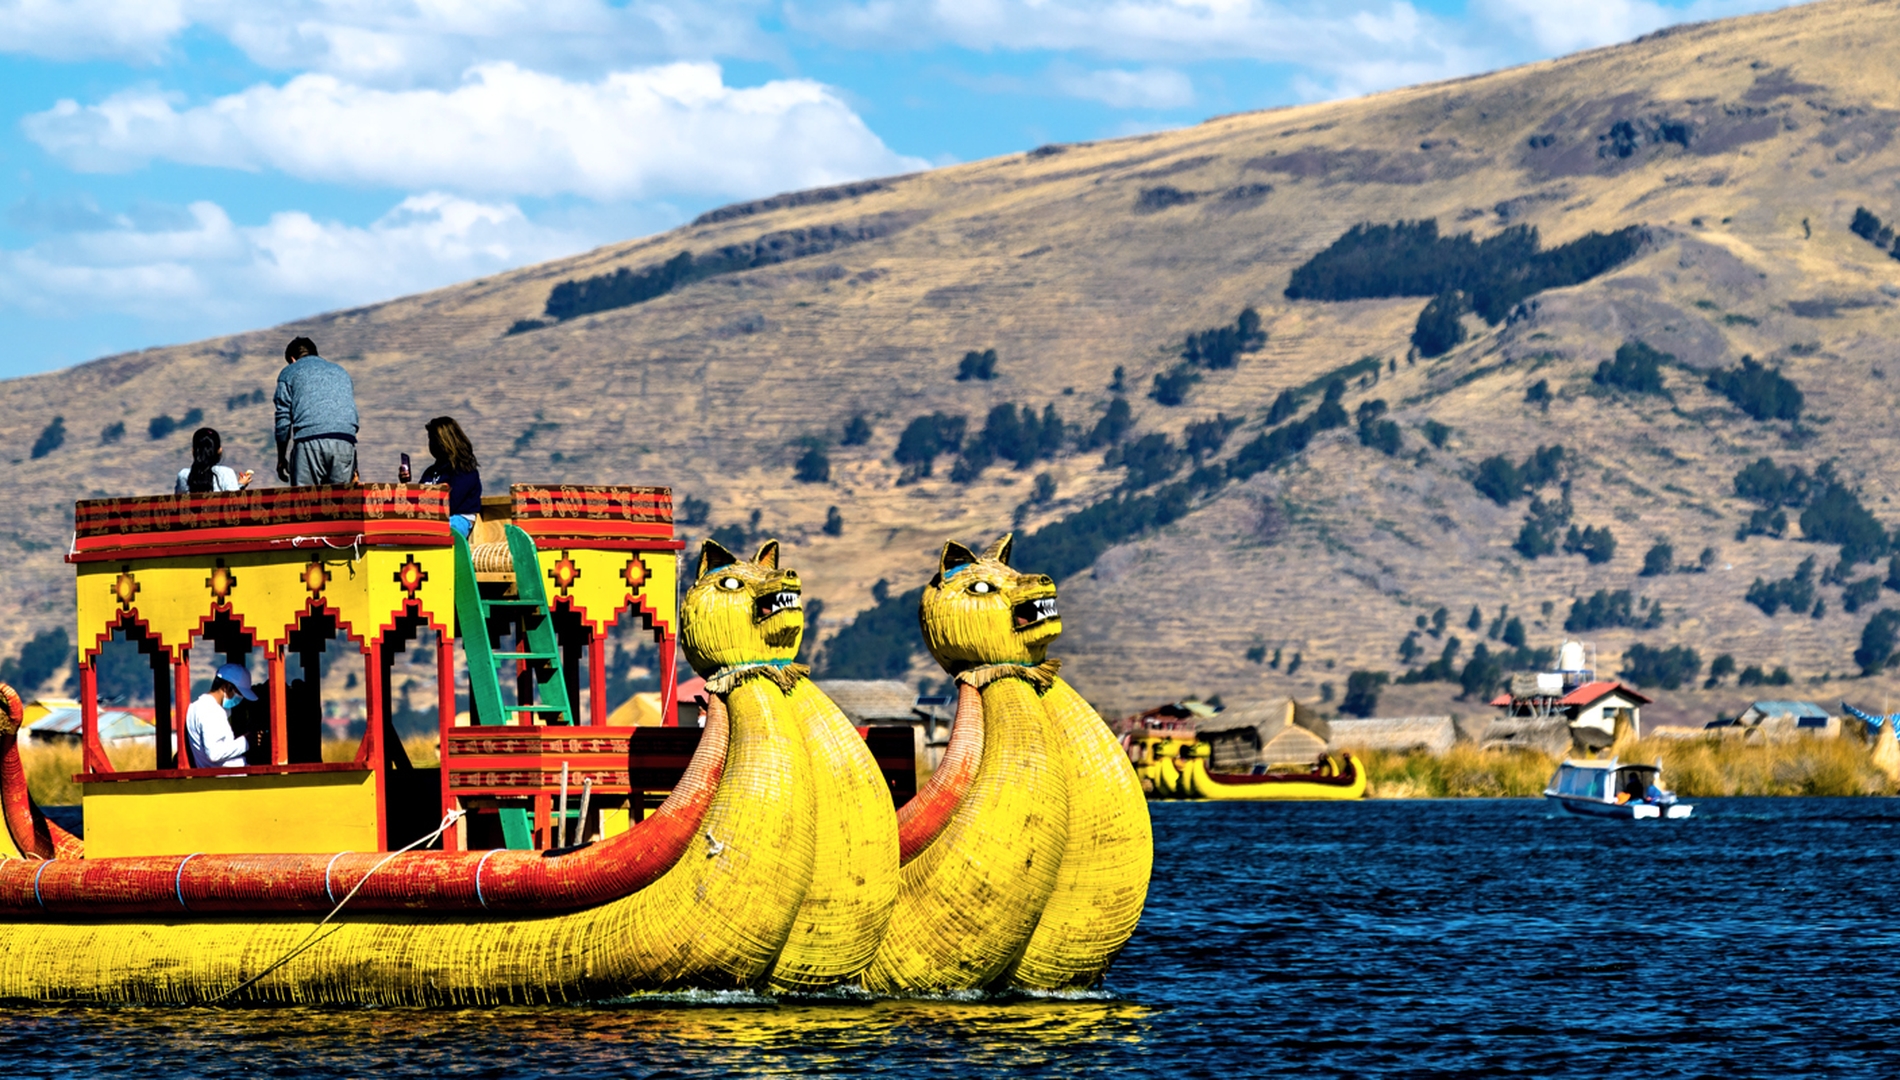 Marvel at the floating reed boats on Lake Titicaca